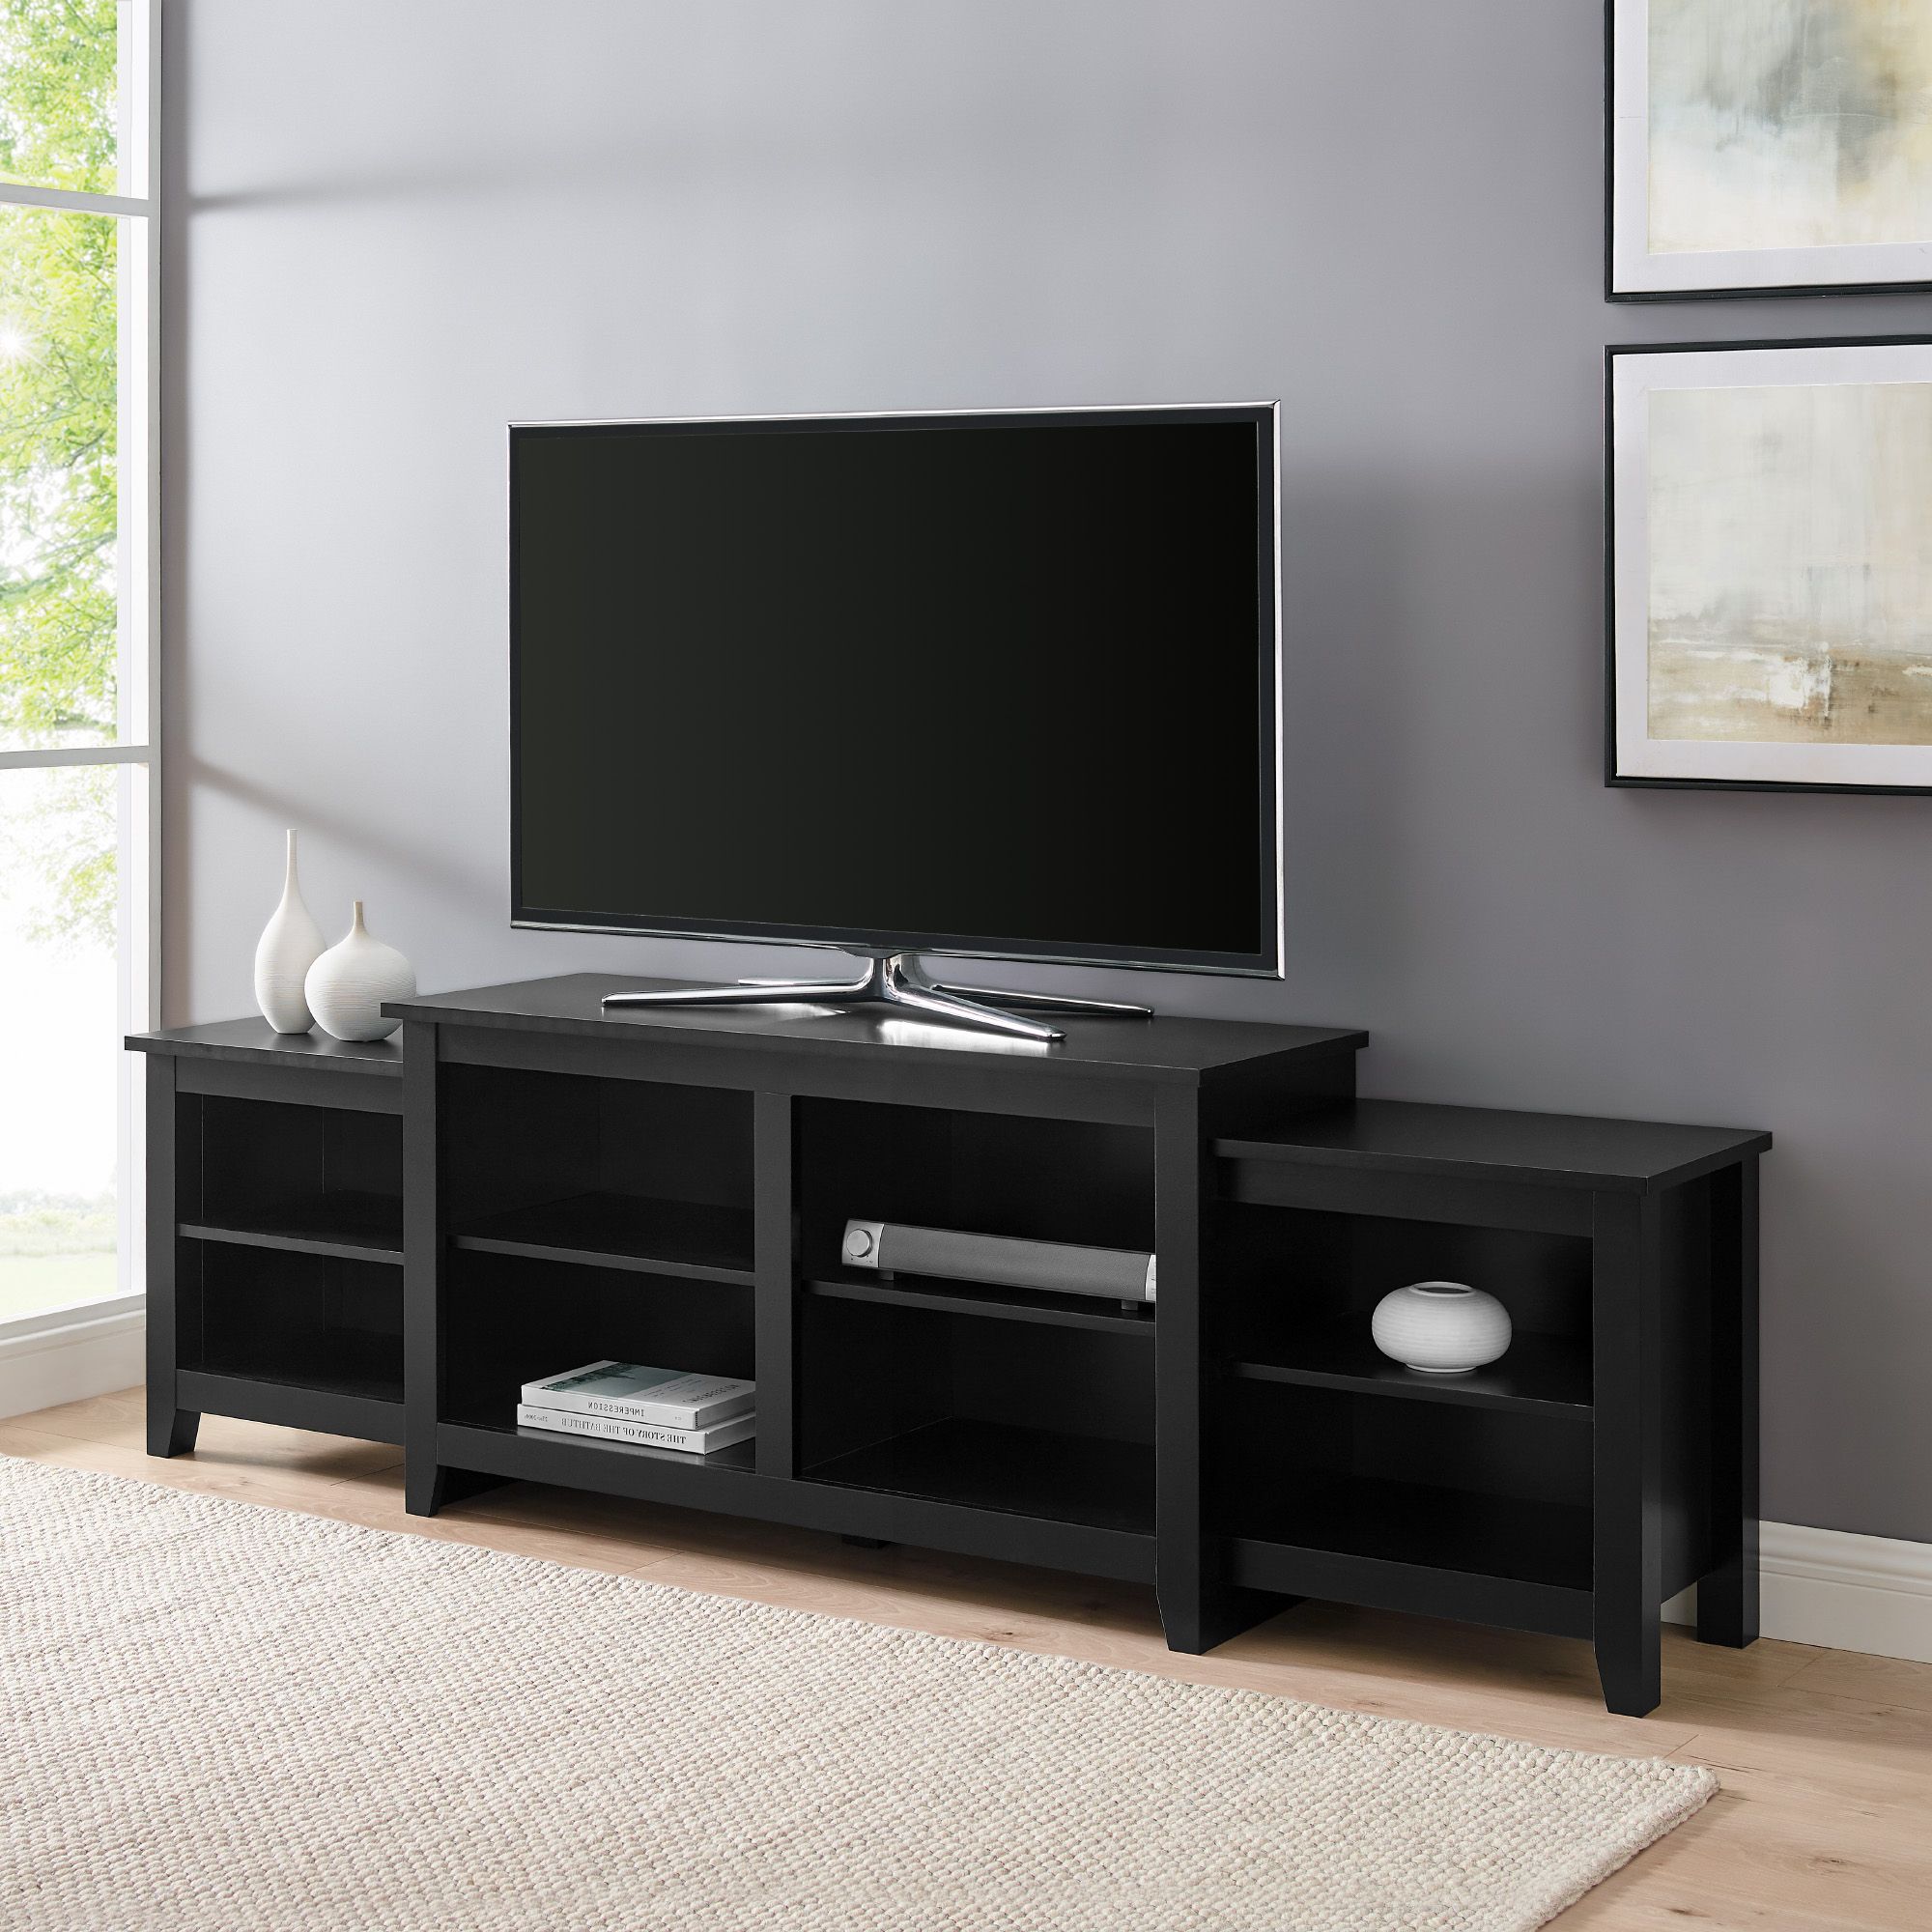 Manor Park Transitional Farmhouse Tv Stand For Tvs Up To With Ailiana Tv Stands For Tvs Up To 88" (View 8 of 20)